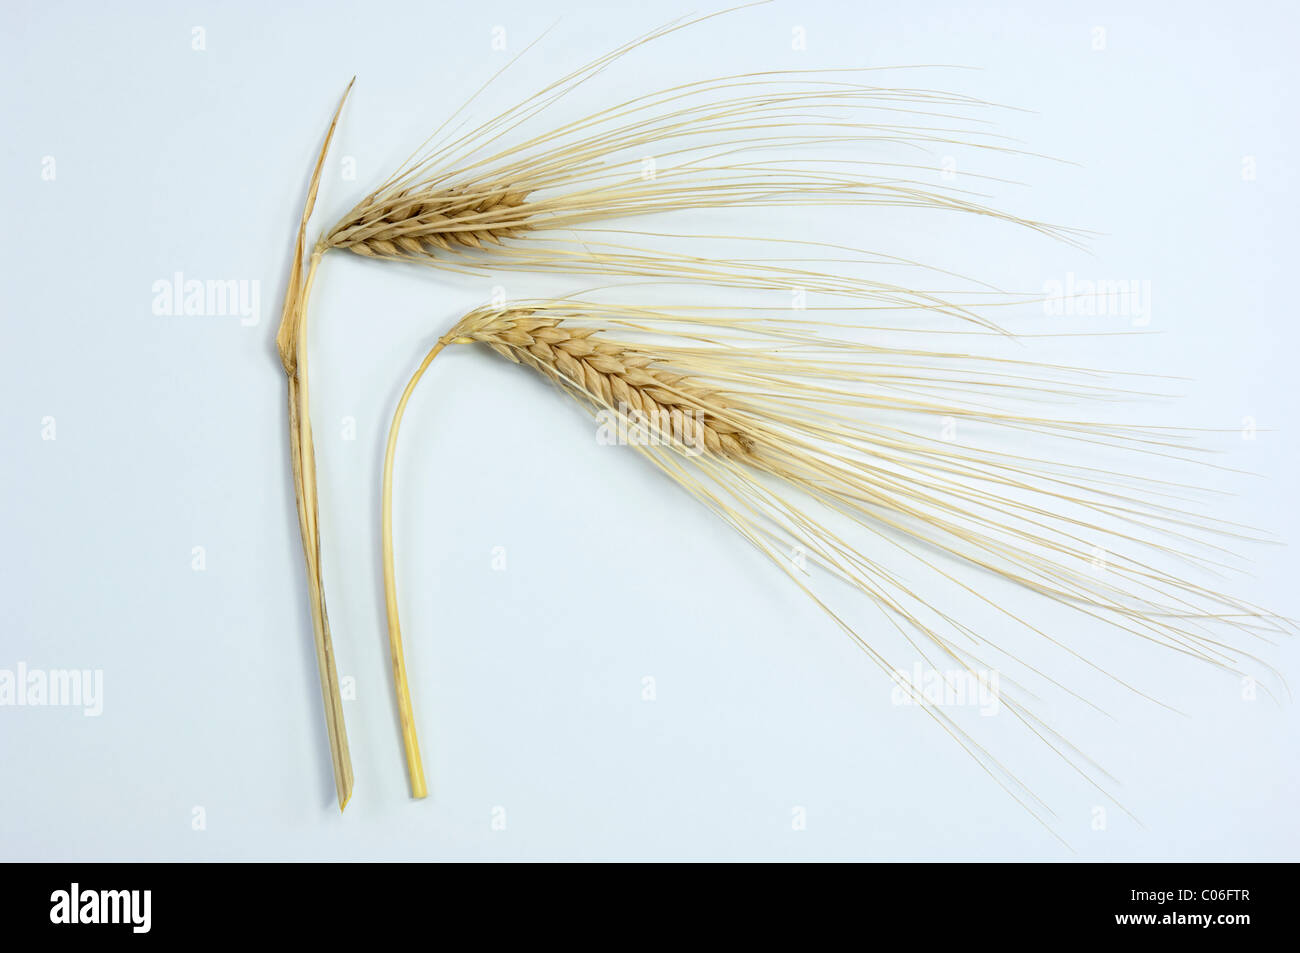 Six-row Barley (Hordeum vulgare f. hexastichon), two ripe ears. Studio picture against a white background. Stock Photo